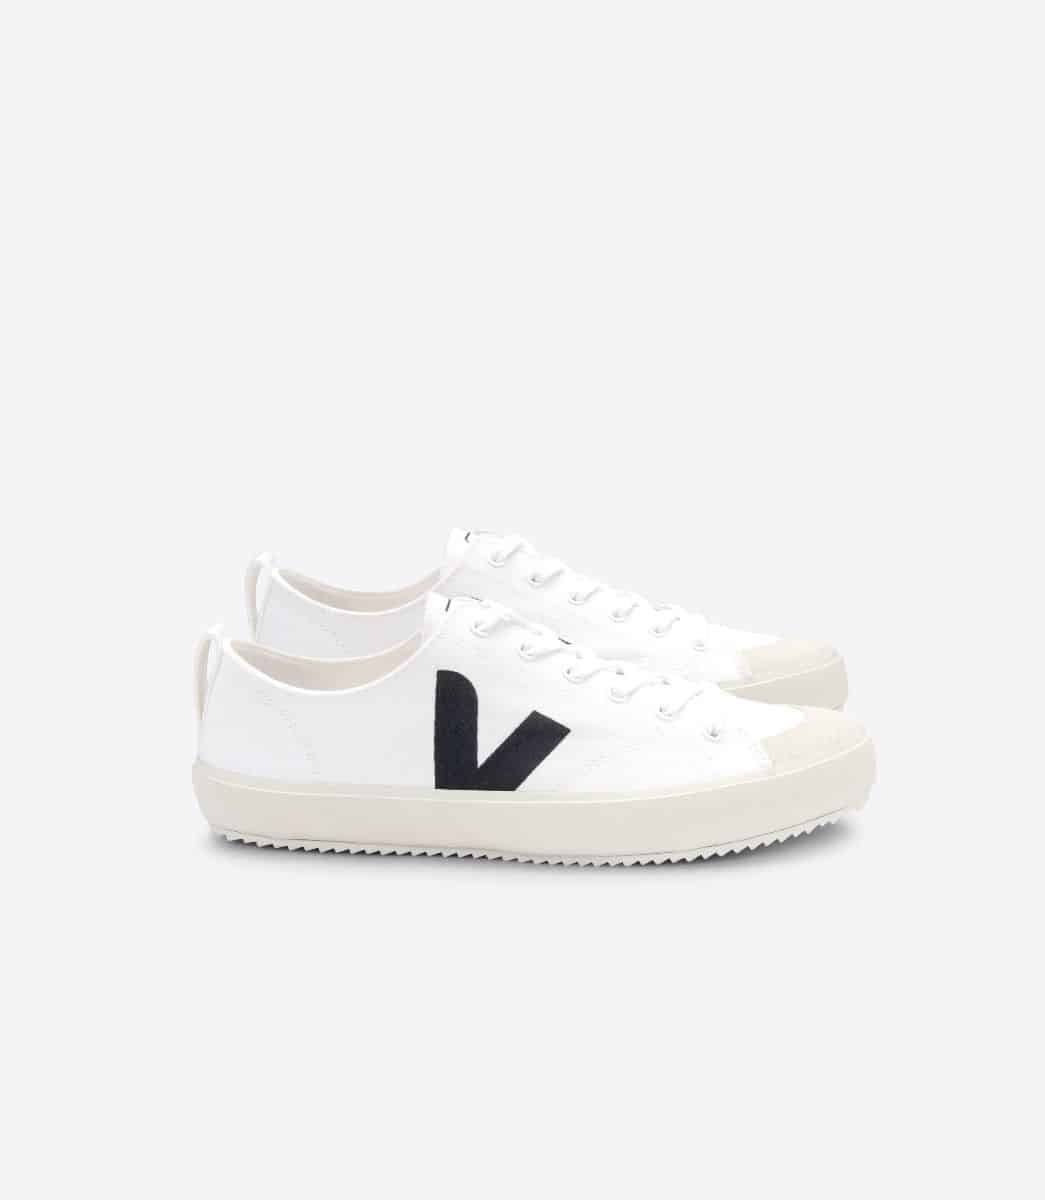 White trainers with black V logo from Veja